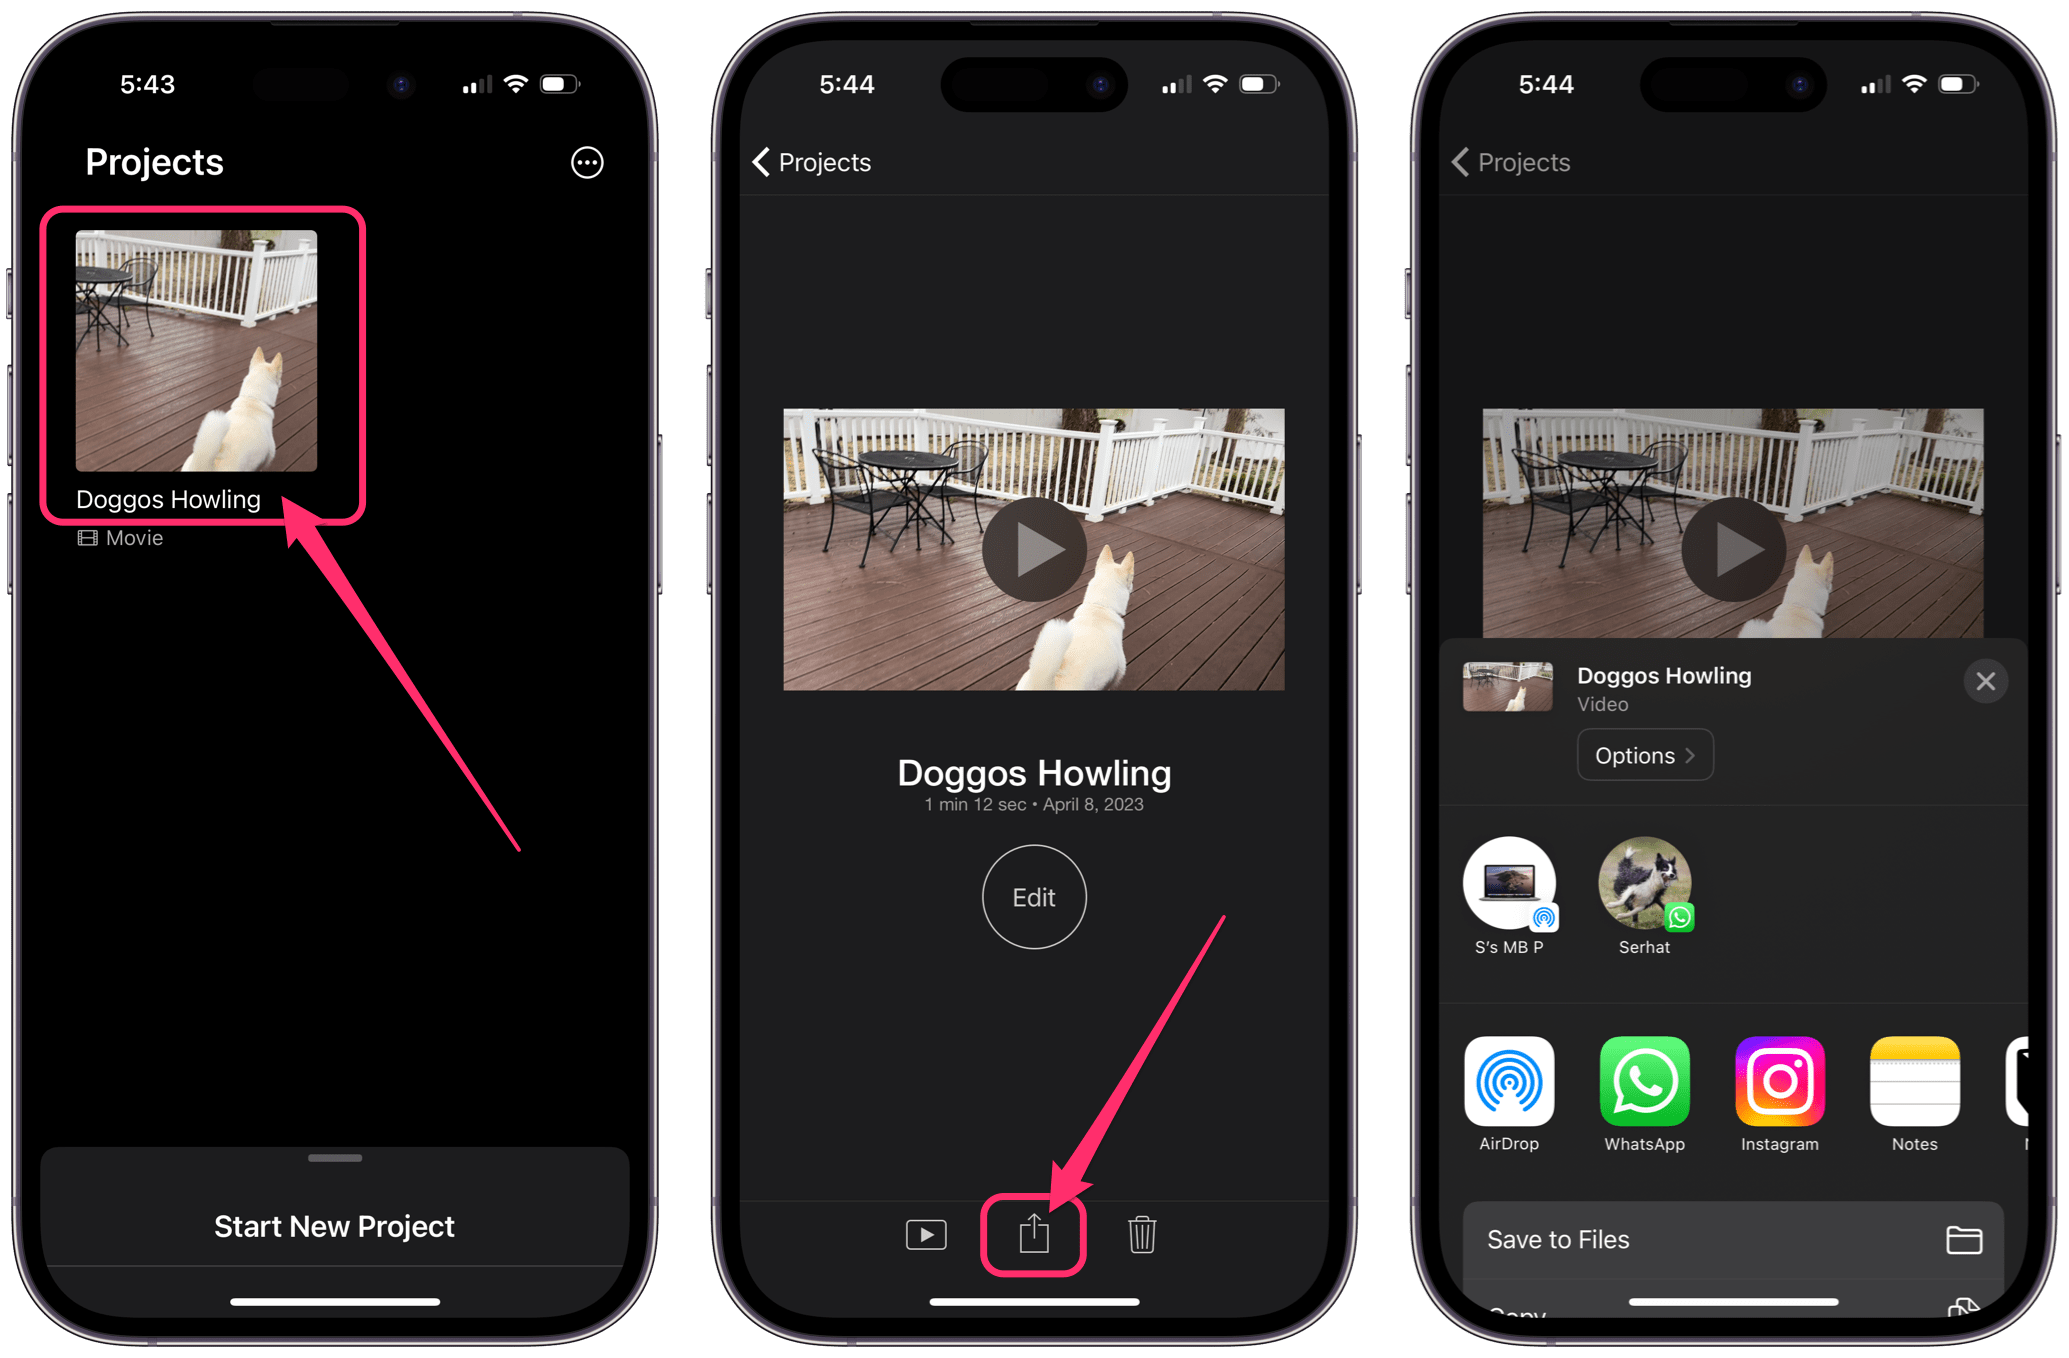 select video in projects, then tap share button